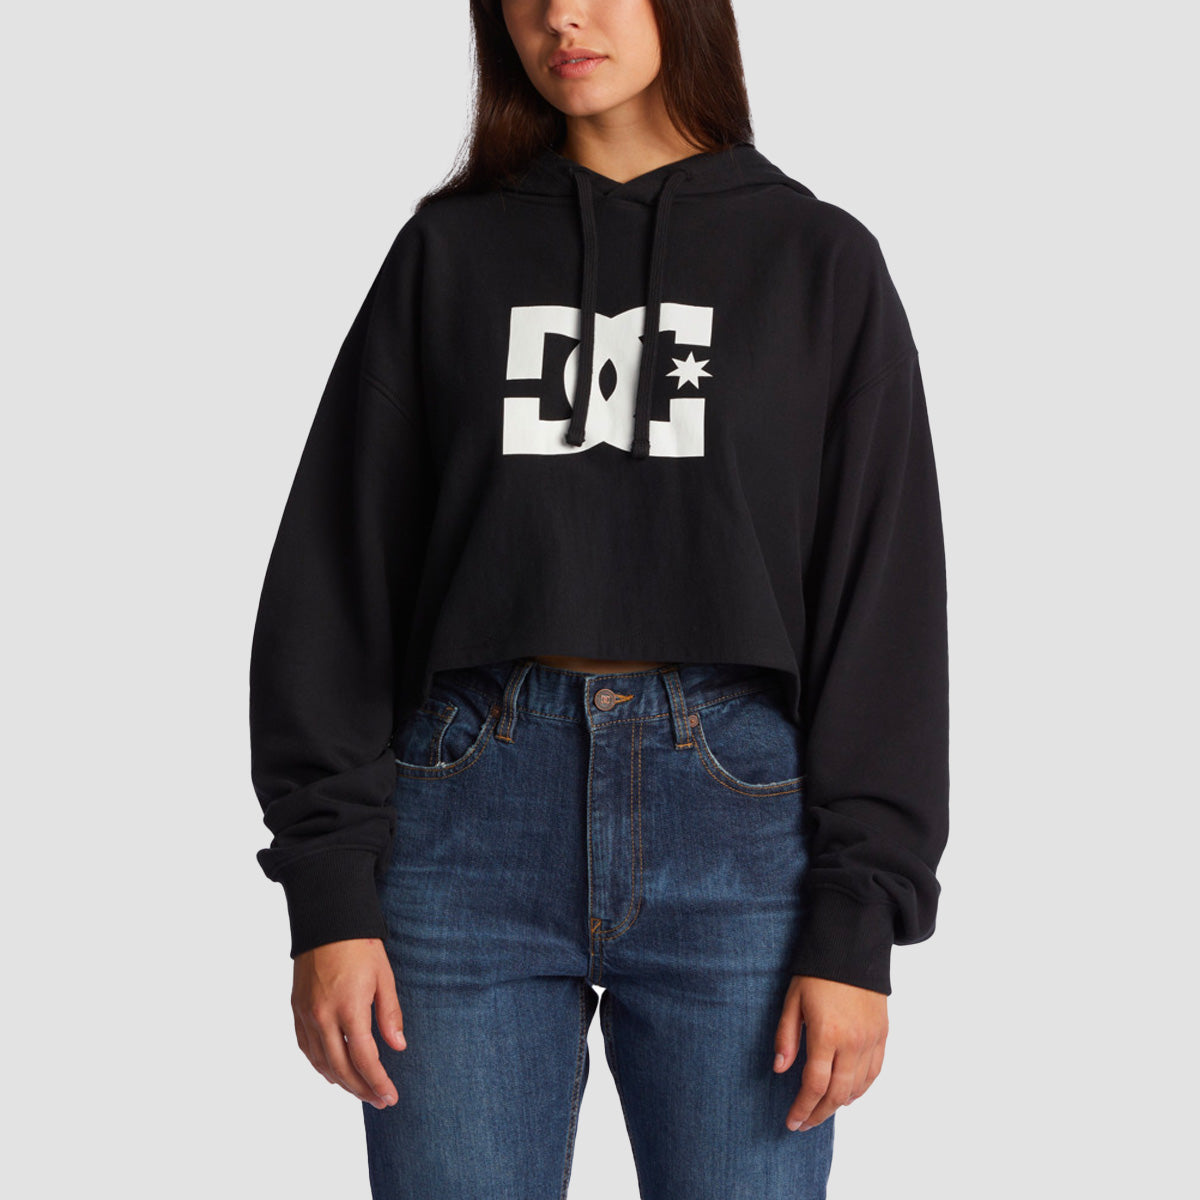 DC Star Cropped Pullover Hoodie Black - Womens